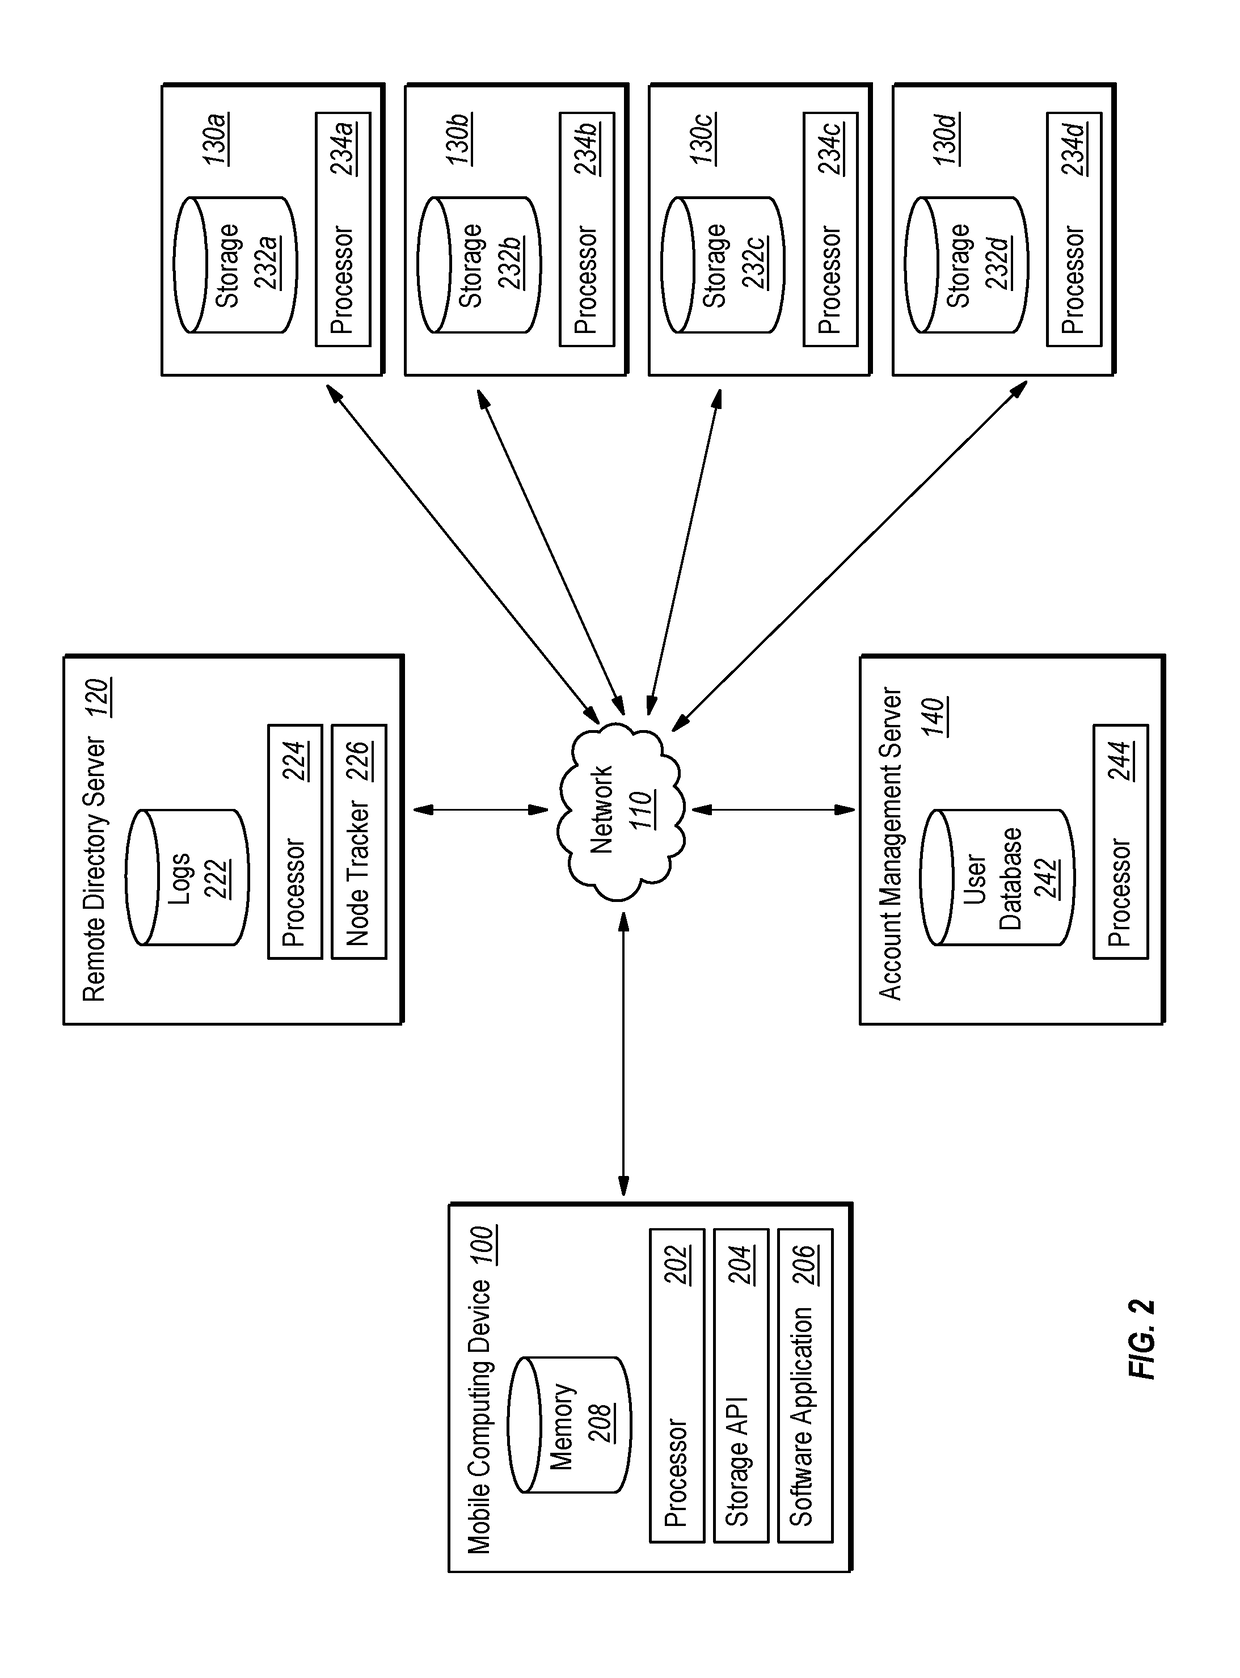 Link-server caching